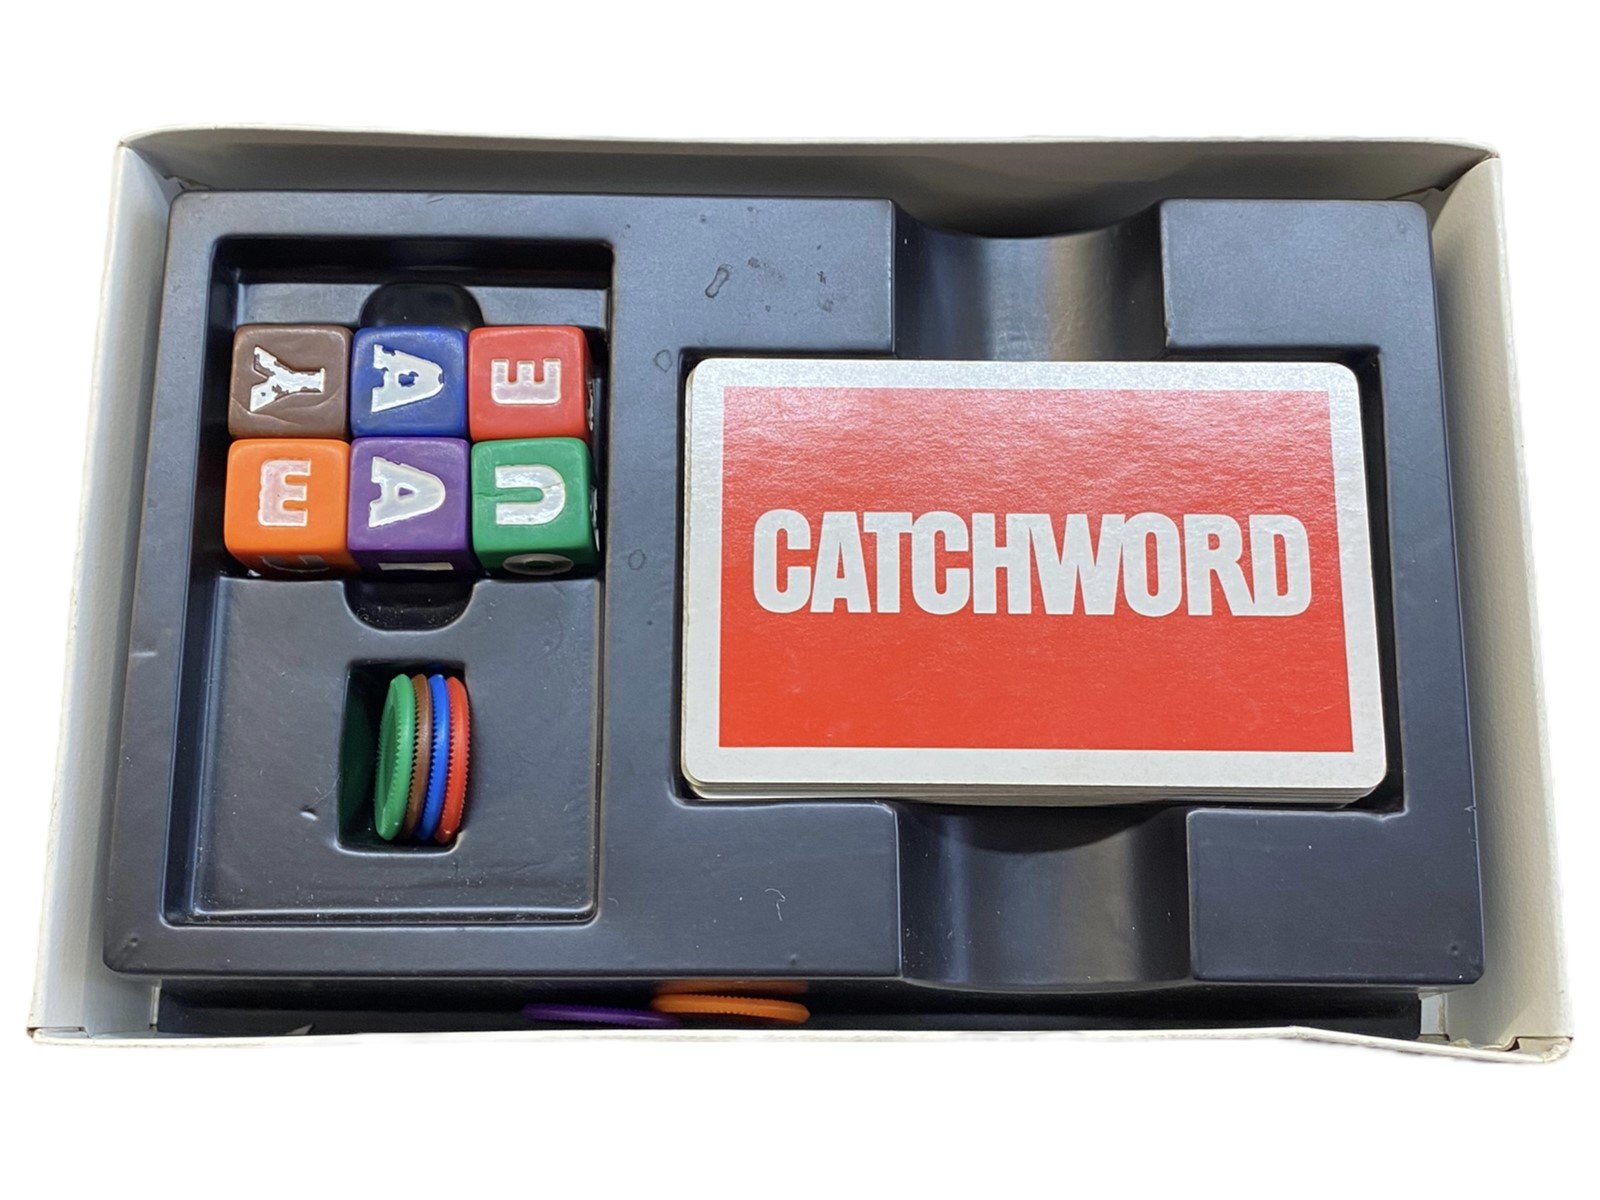 Catchword a Wild Word Game of Letter Cards and Cubes by The Makers of UNO